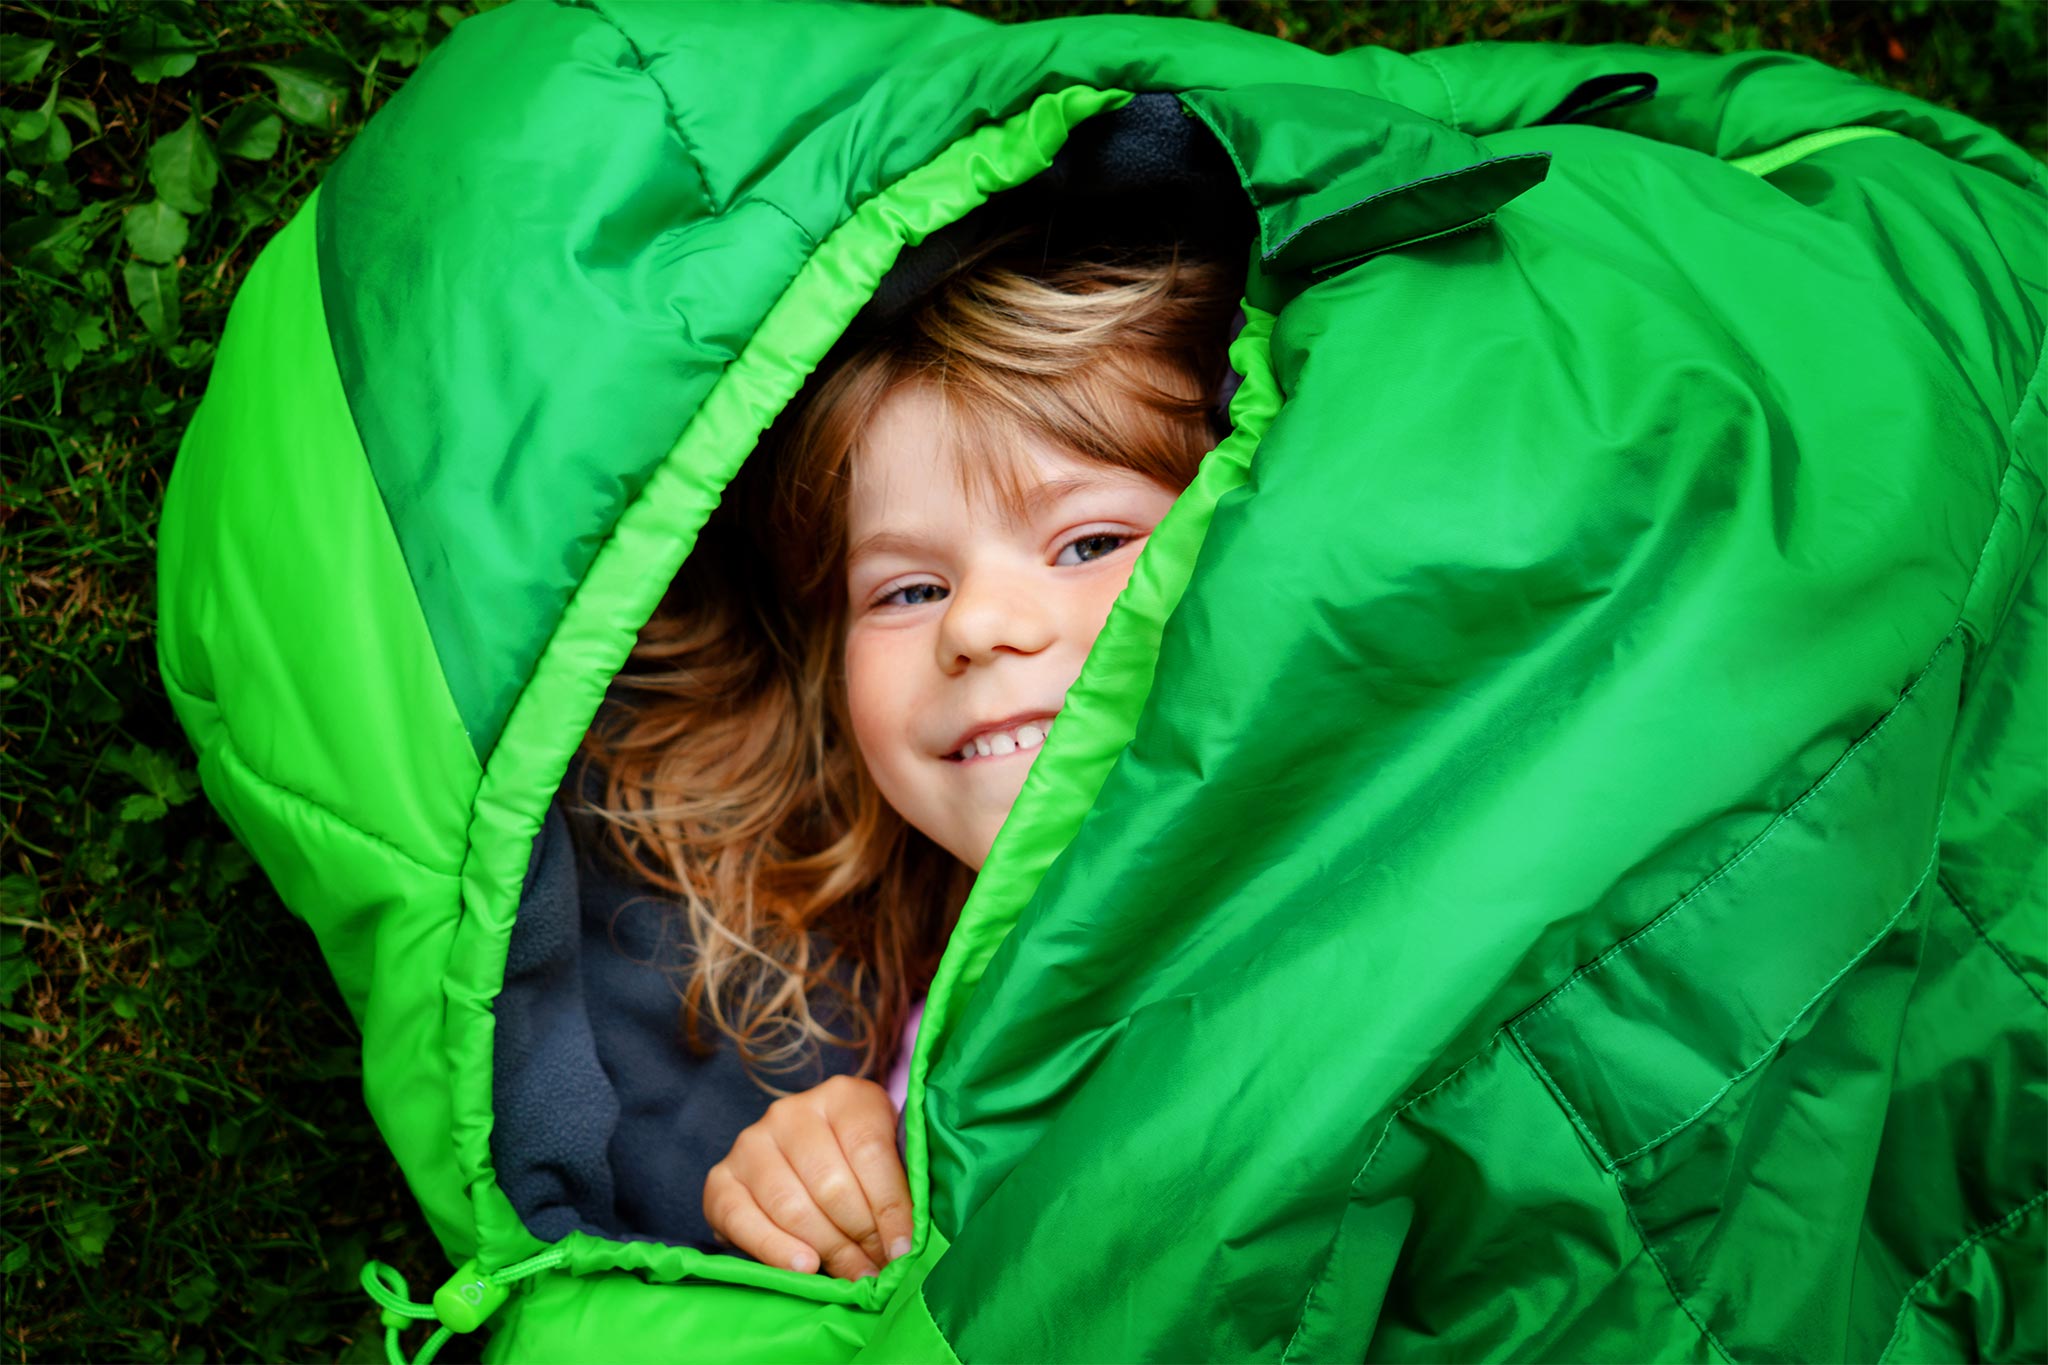 A child peeking and smiling inside the sleeping bag